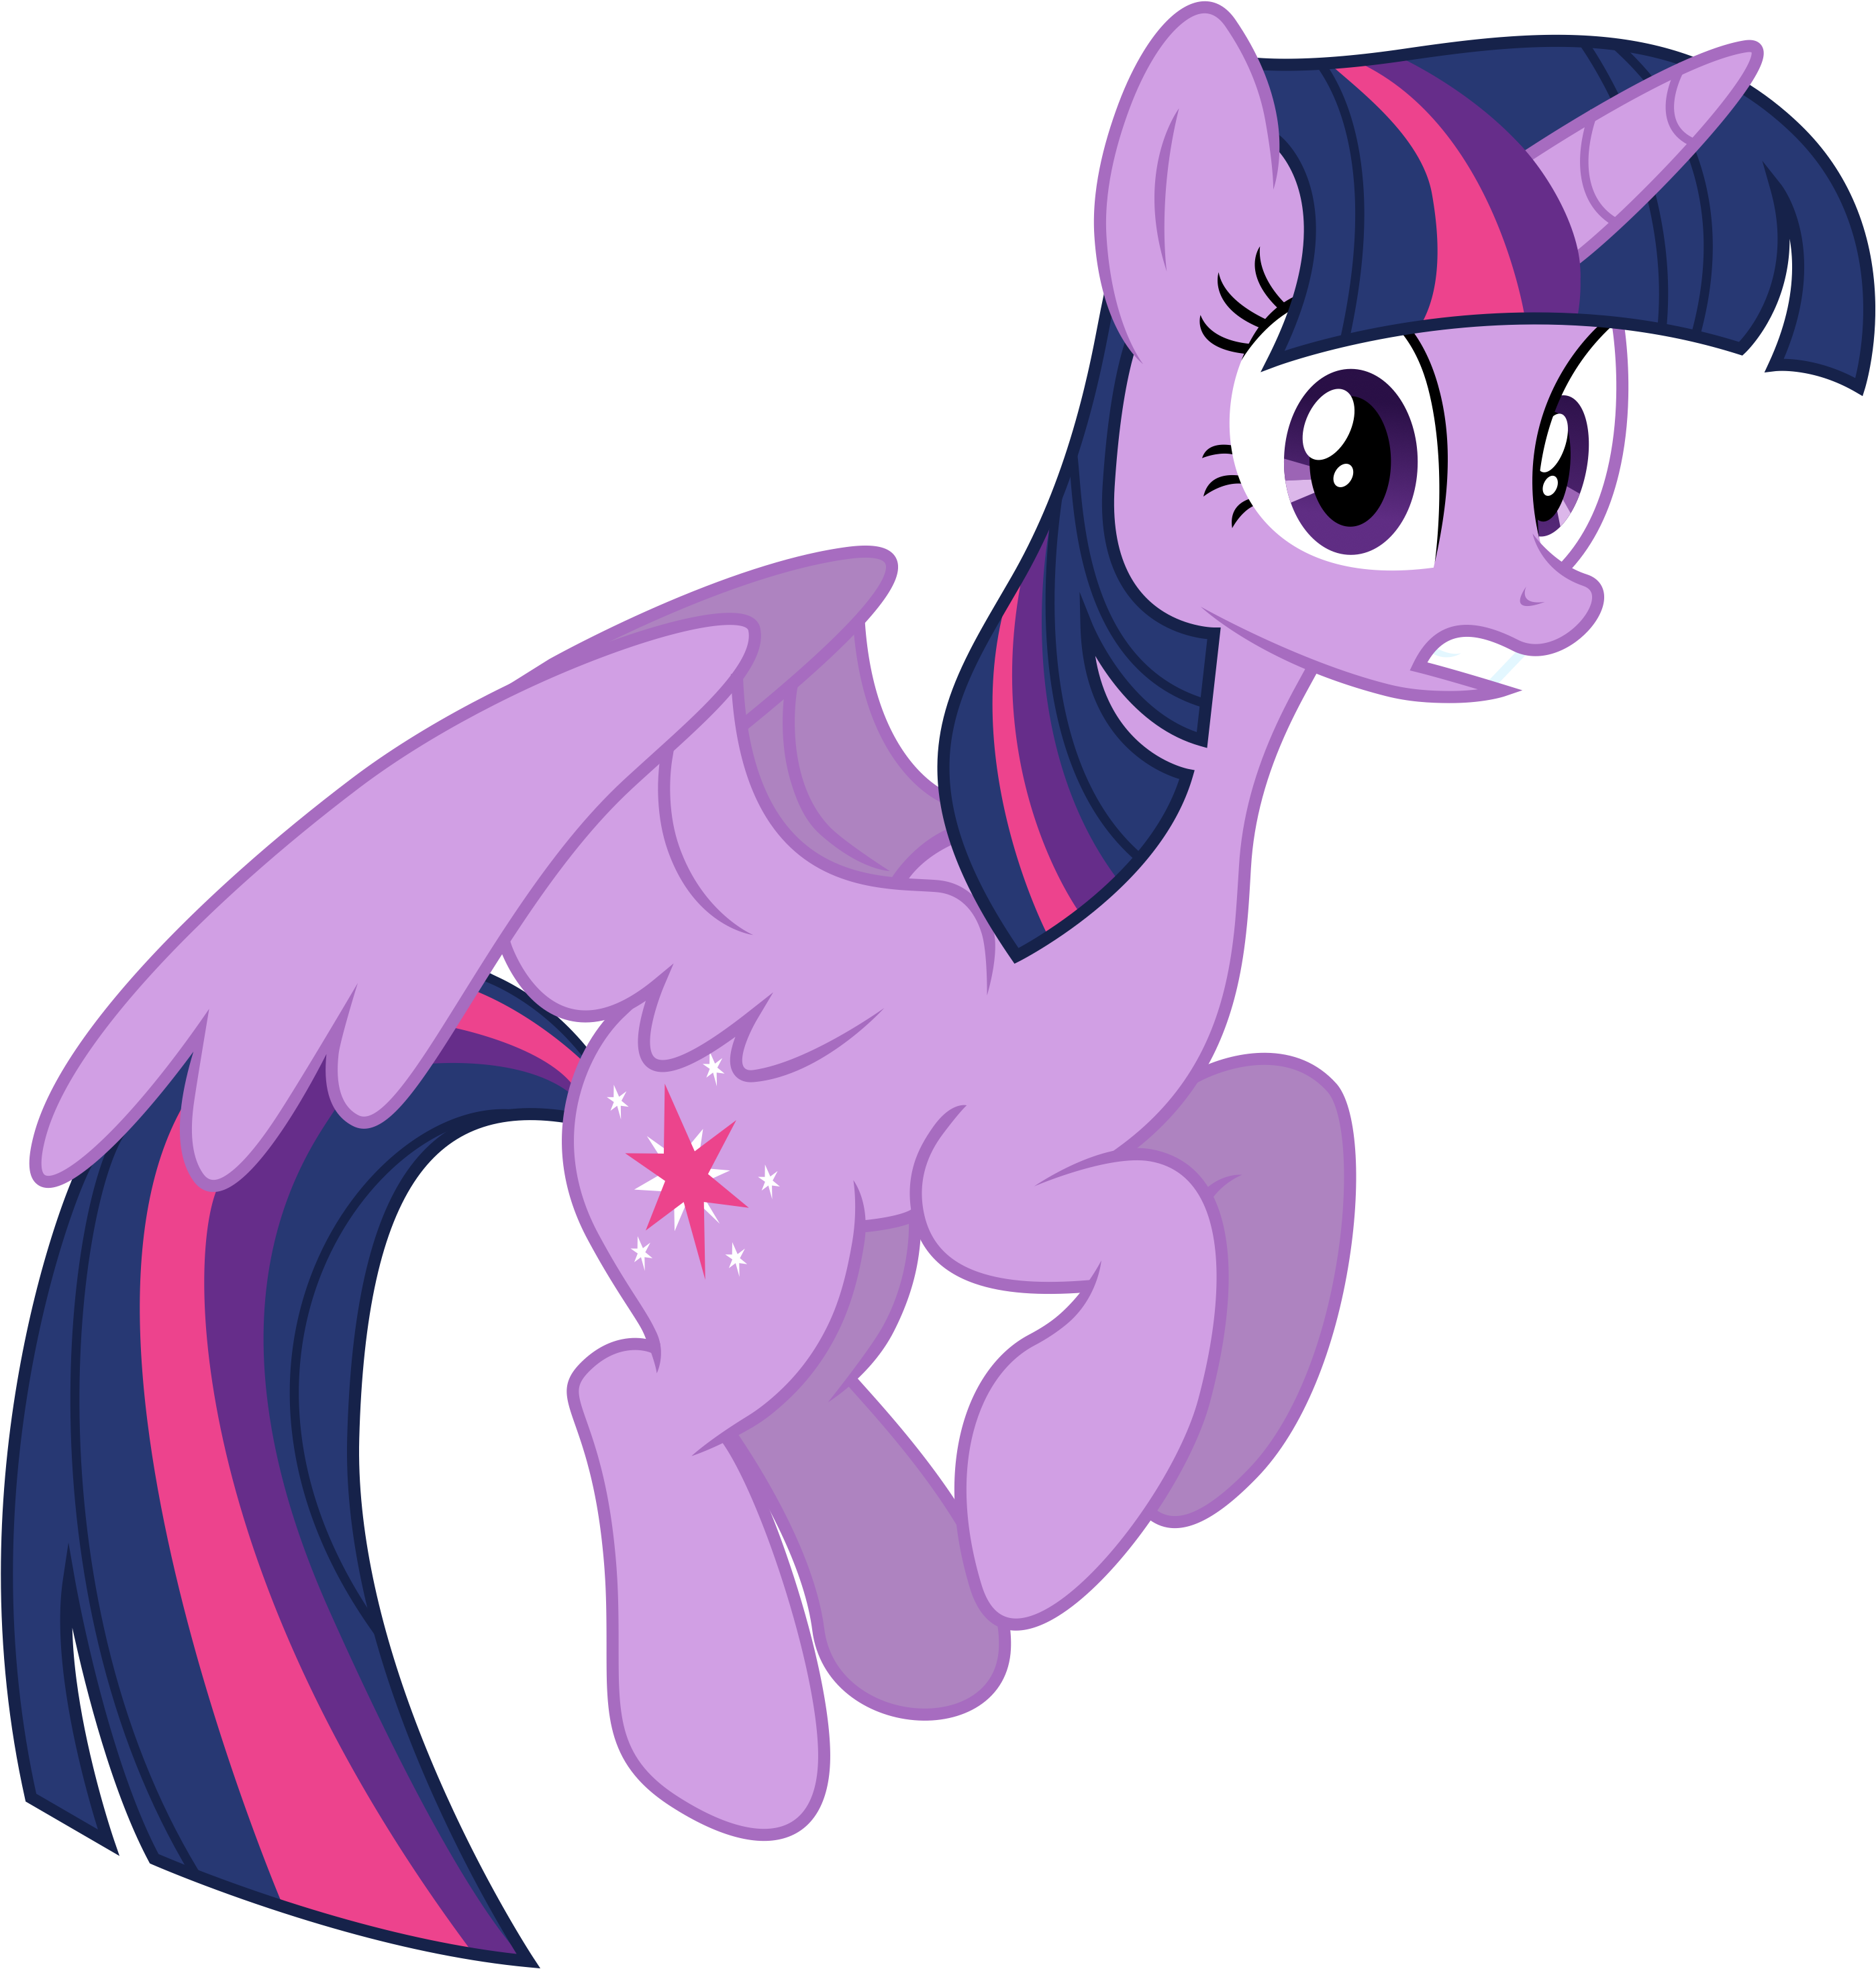 Twilight Sparkle Flying By Paulysentry - Princess Twilight Sparkle Flying (3000x3000)